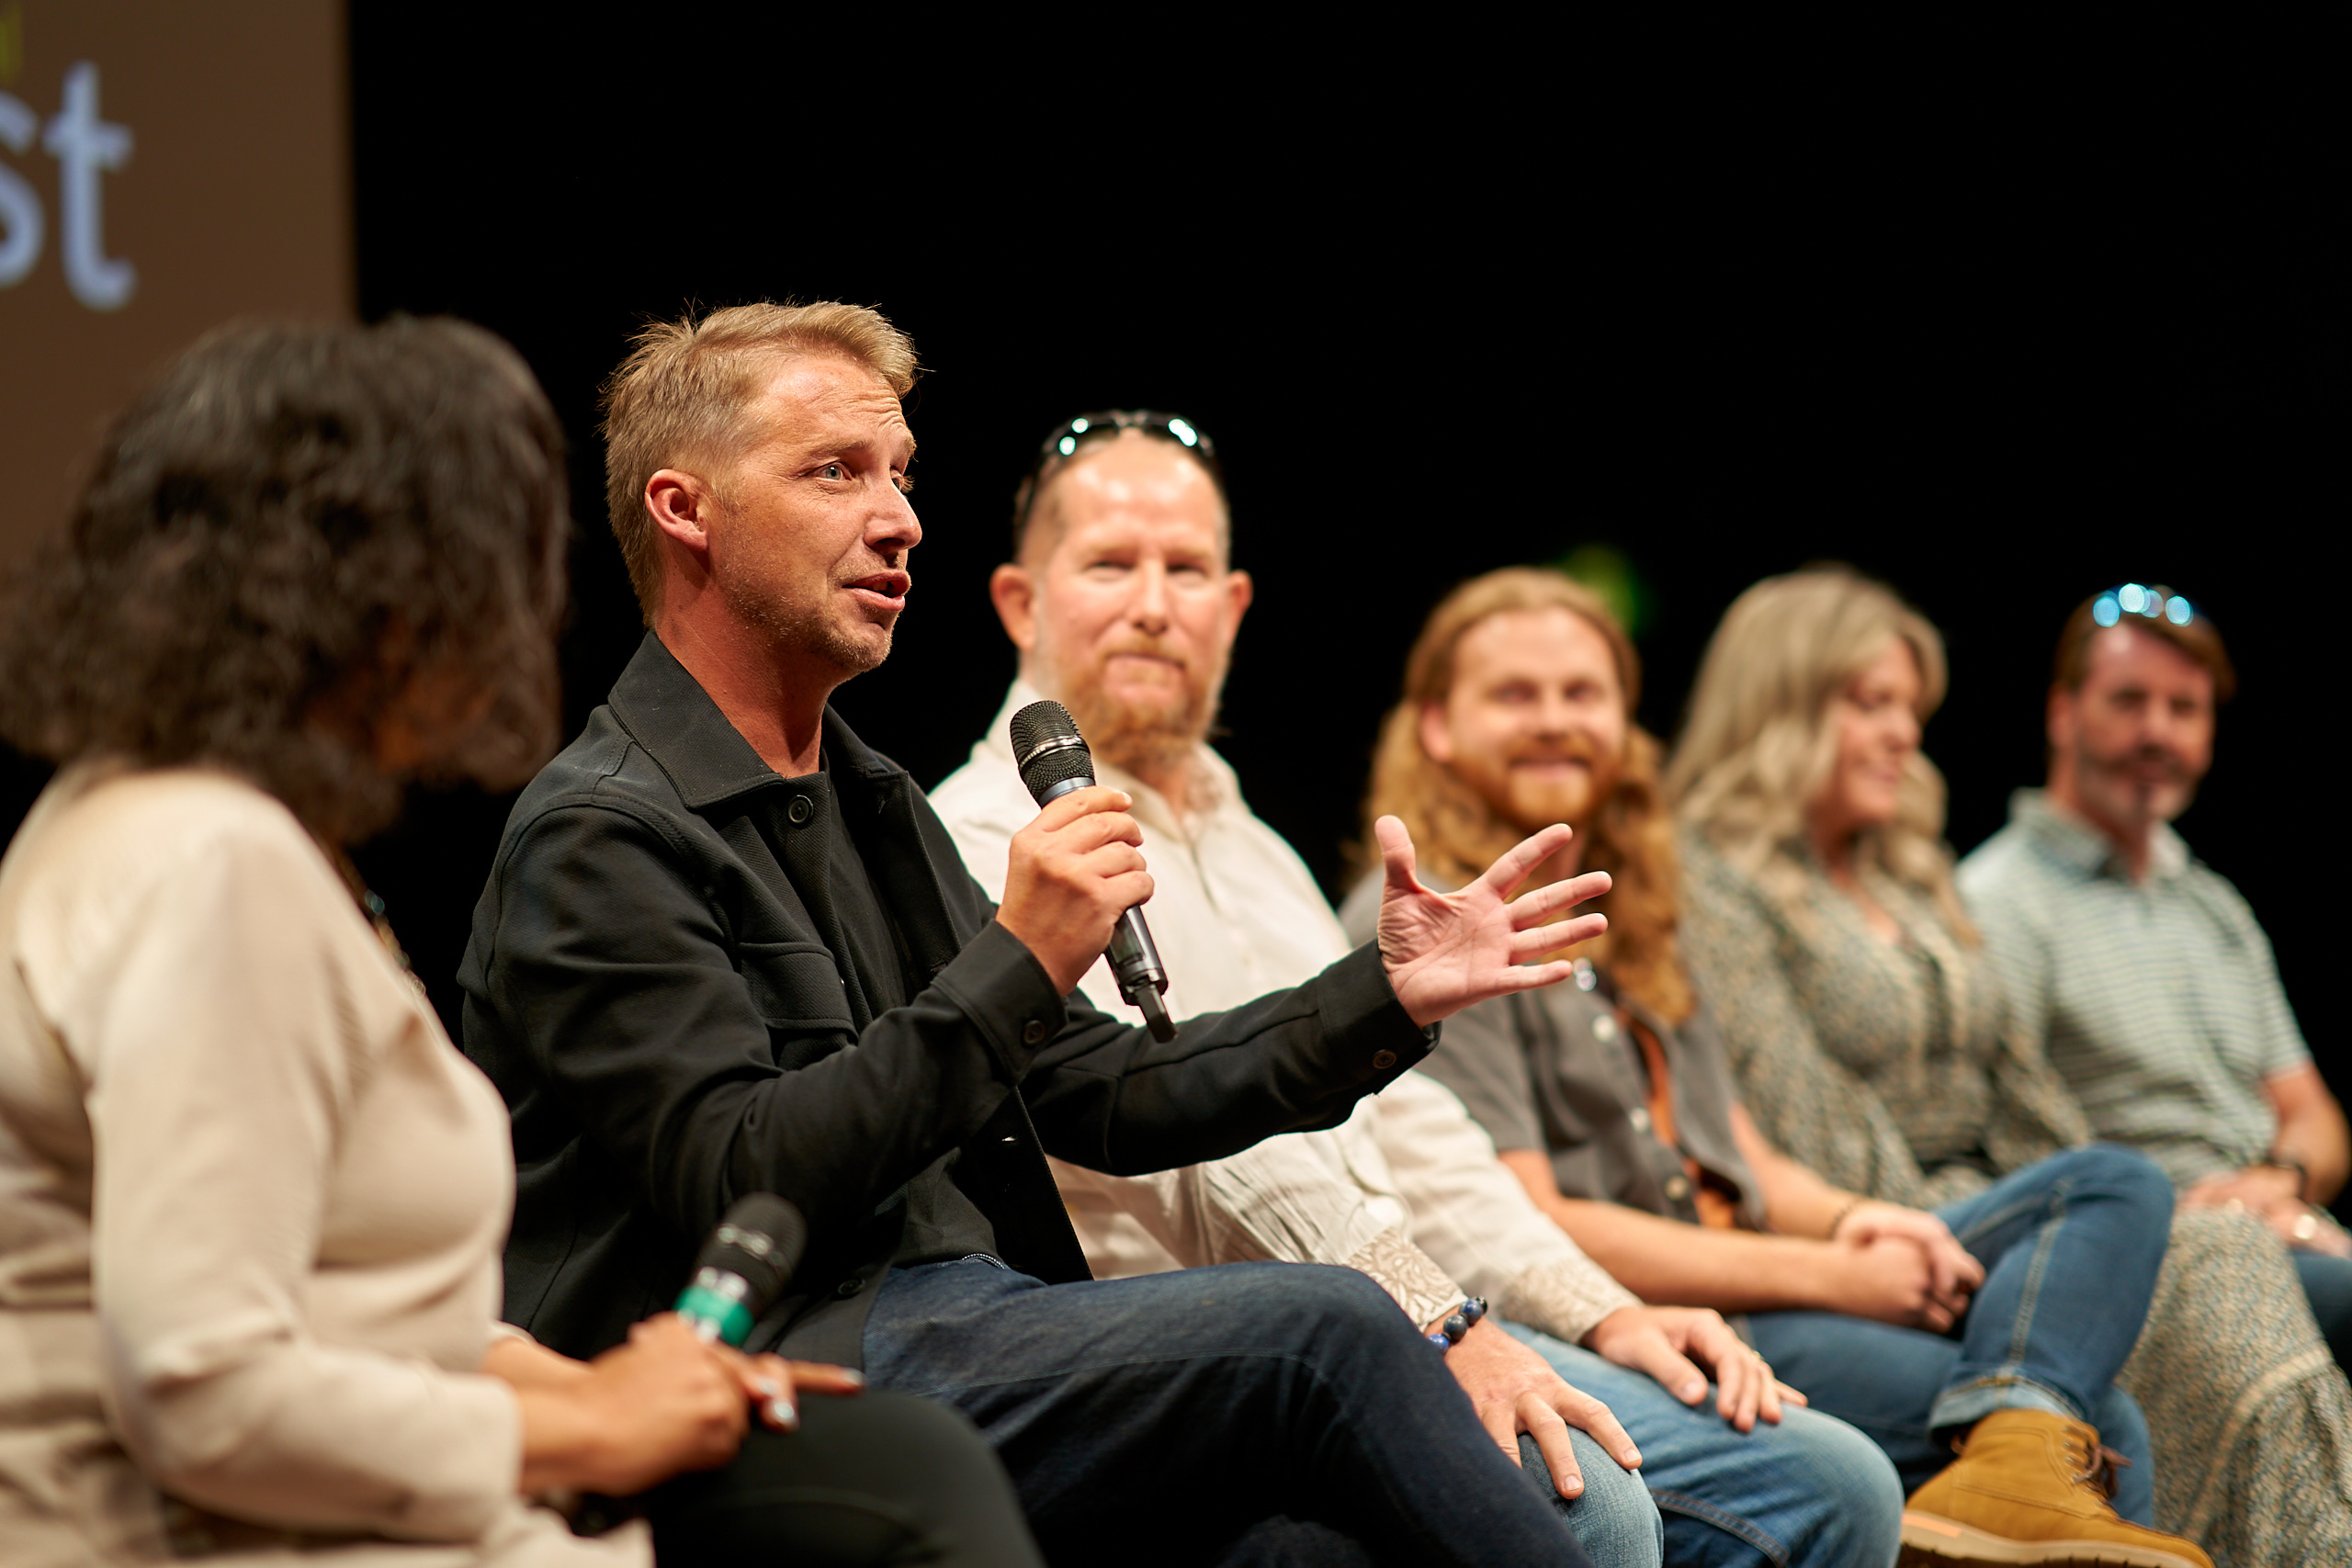 Mike Shoreman's Photo - speaking at panel discussion